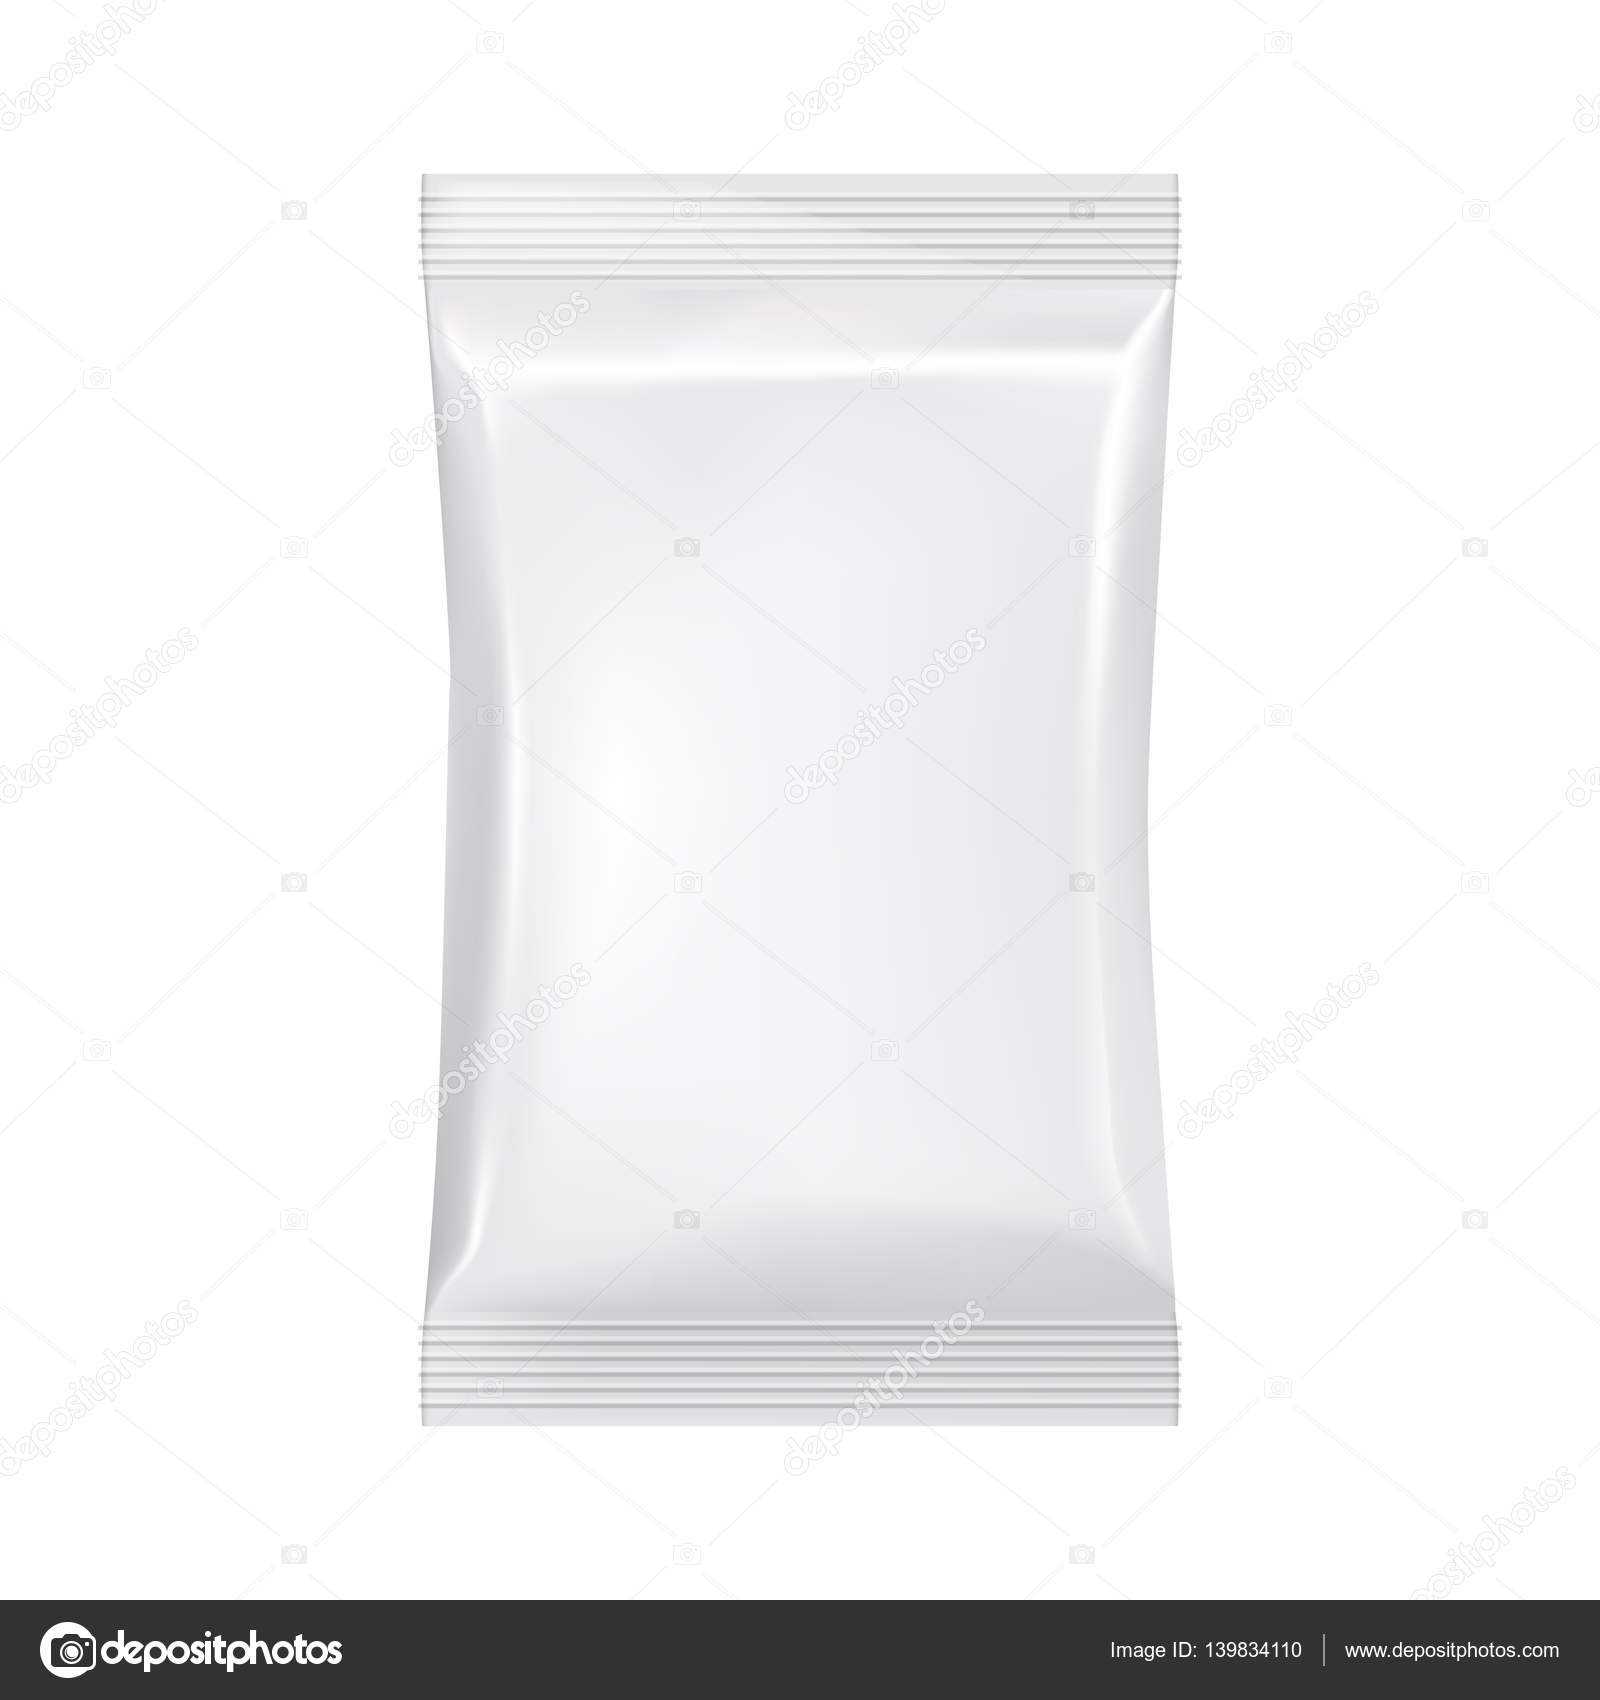 Blank Packaging Template Mockup Isolated On White. — Stock Pertaining To Blank Packaging Templates